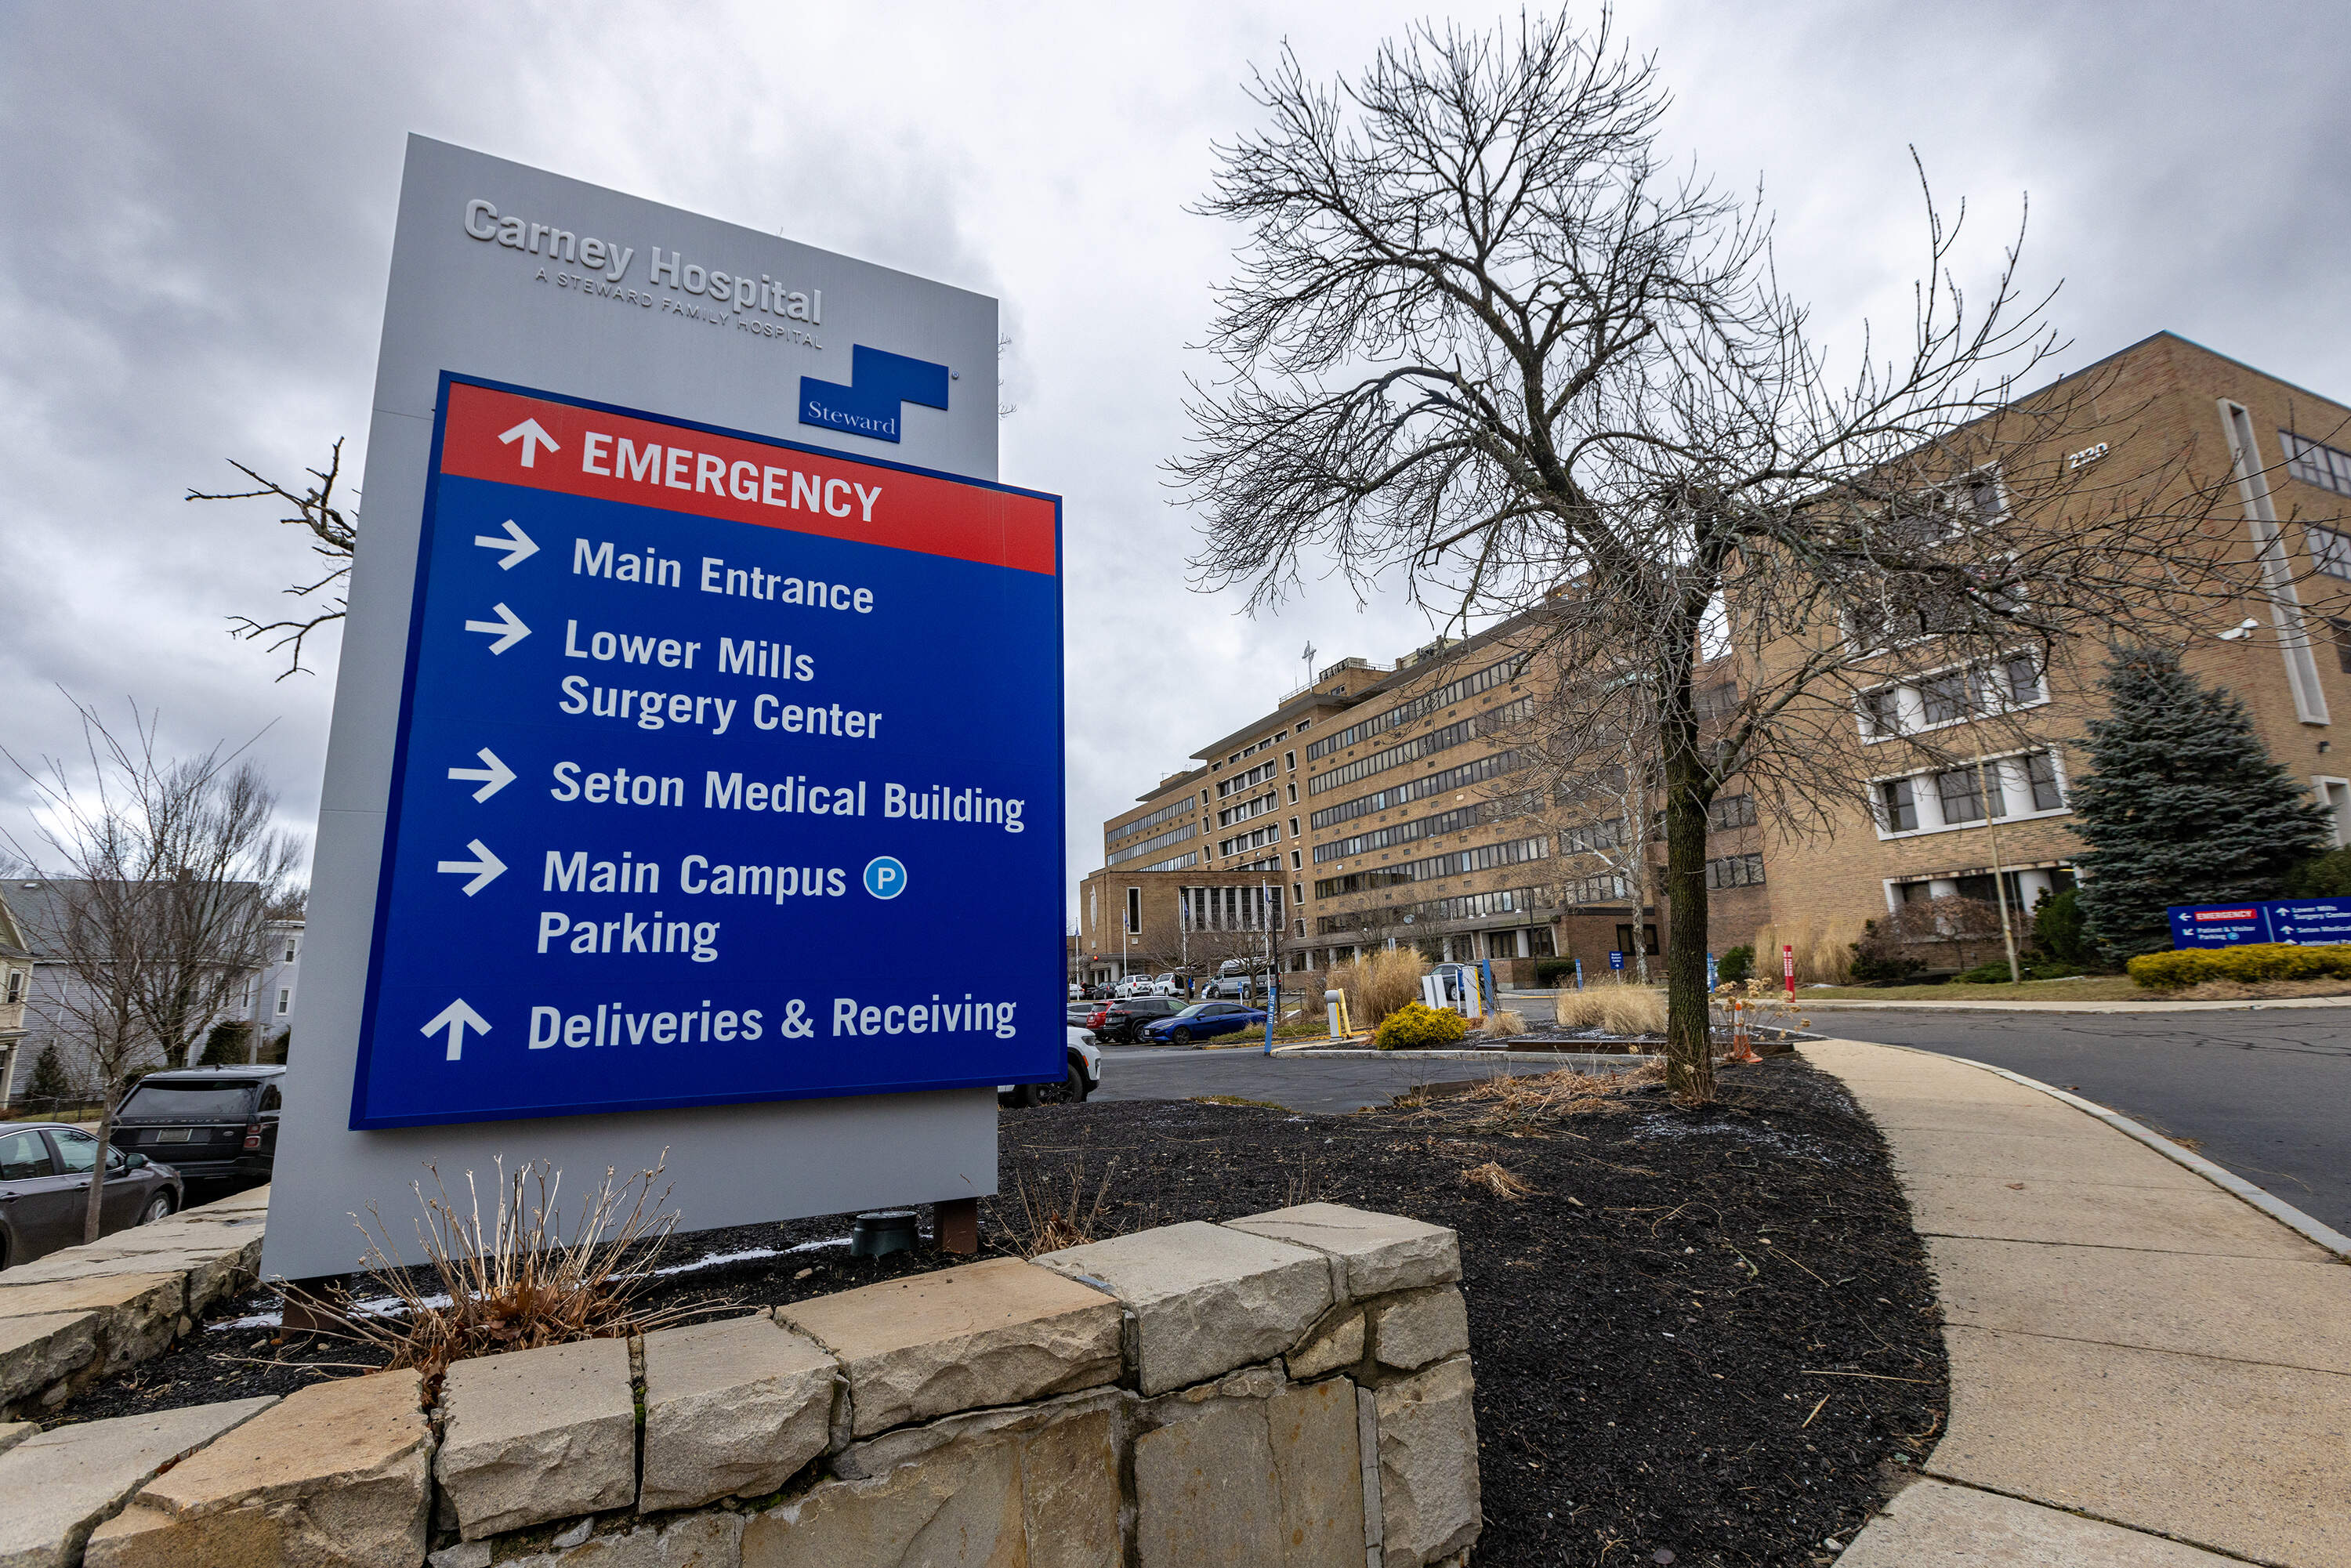 Massachusetts officials are preparing contingency plans to avoid closures at Steward Health Care facilities, which include the Carney Hospital in Dorchester. (Jesse Costa/WBUR)